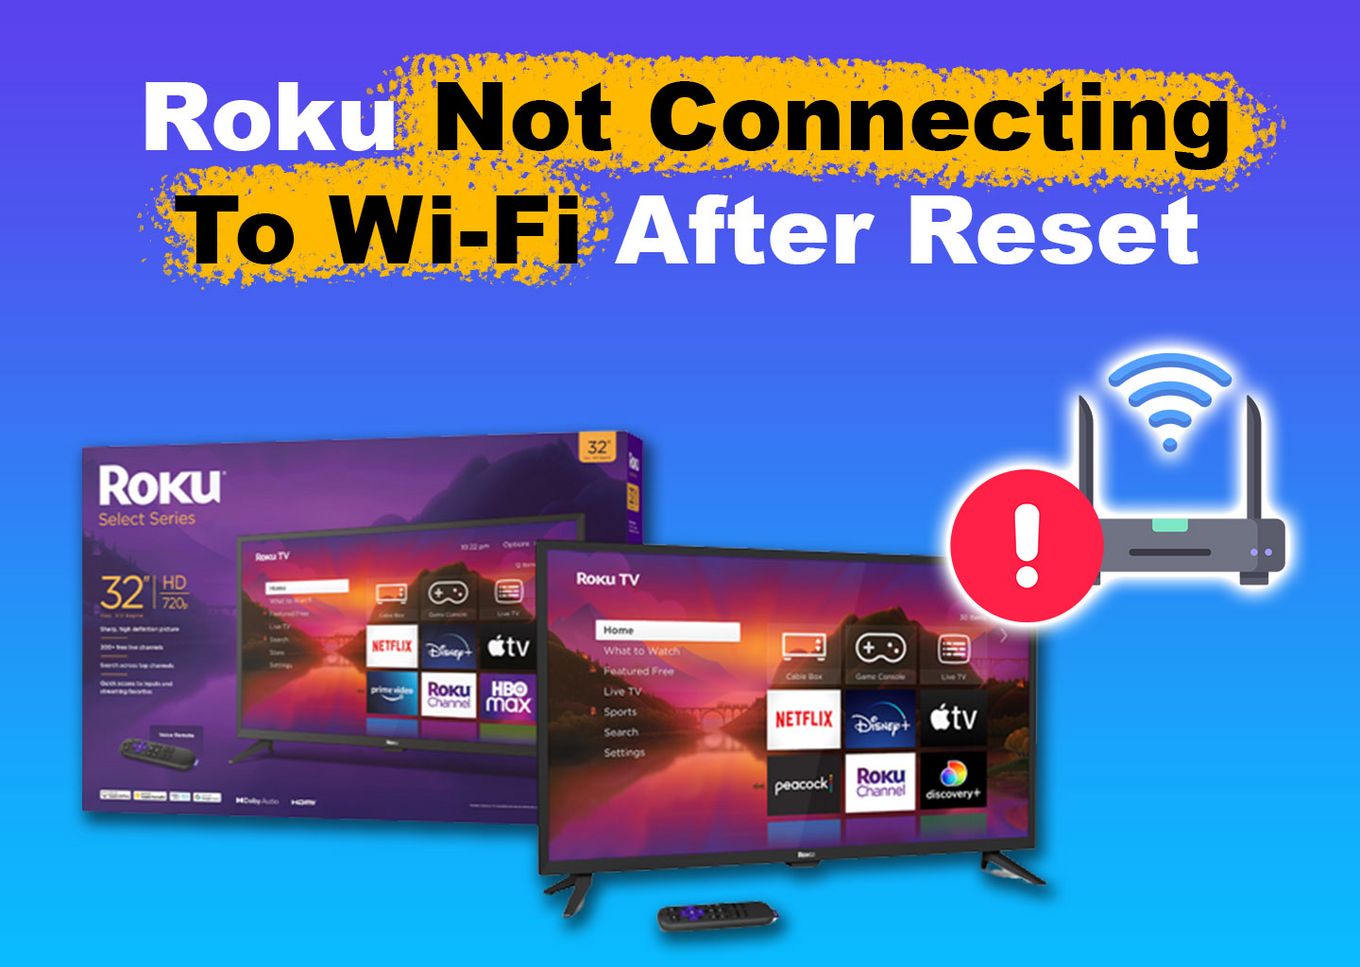 Roku Not Connecting To Wi-Fi After Reset